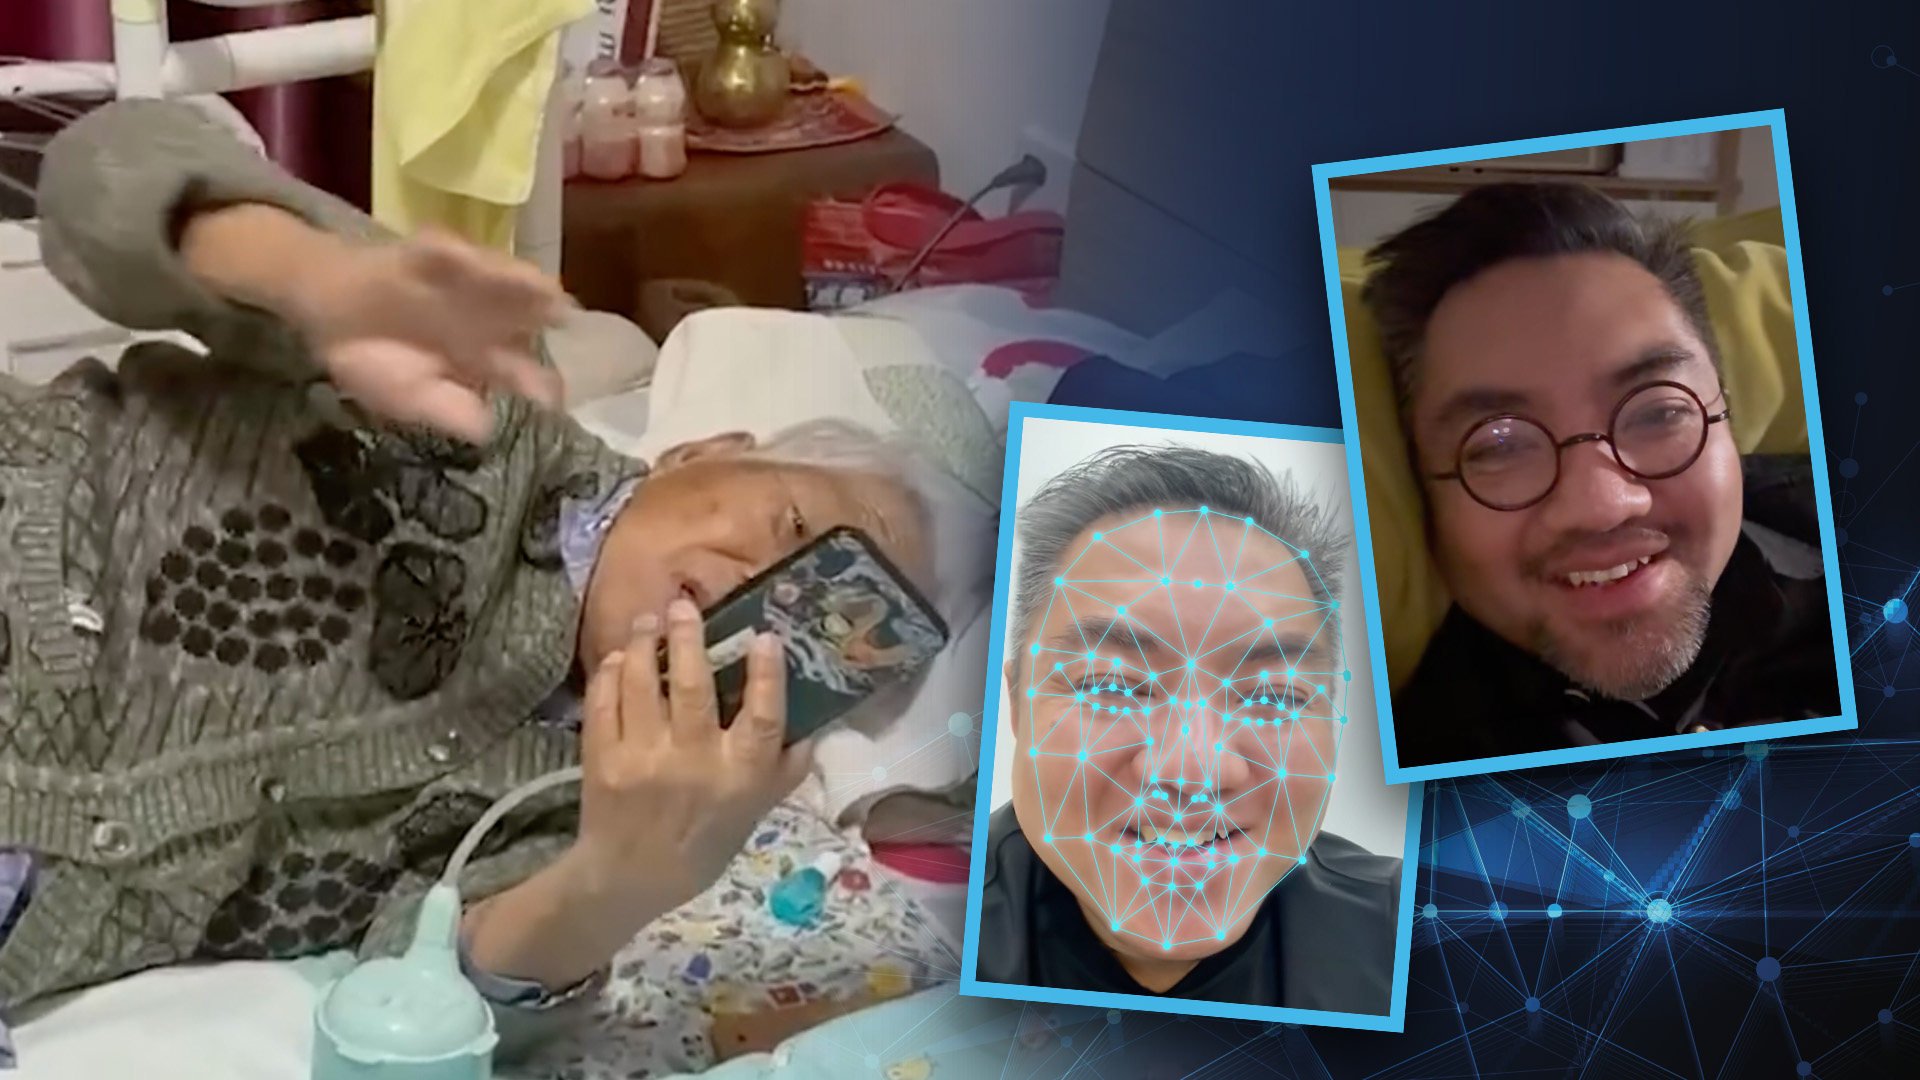 A caring man in China has used deepfake AI technology to imitate his late father in daily video calls to keep his death hidden from his frail grandmother. Photo: SCMP composite/Douyin